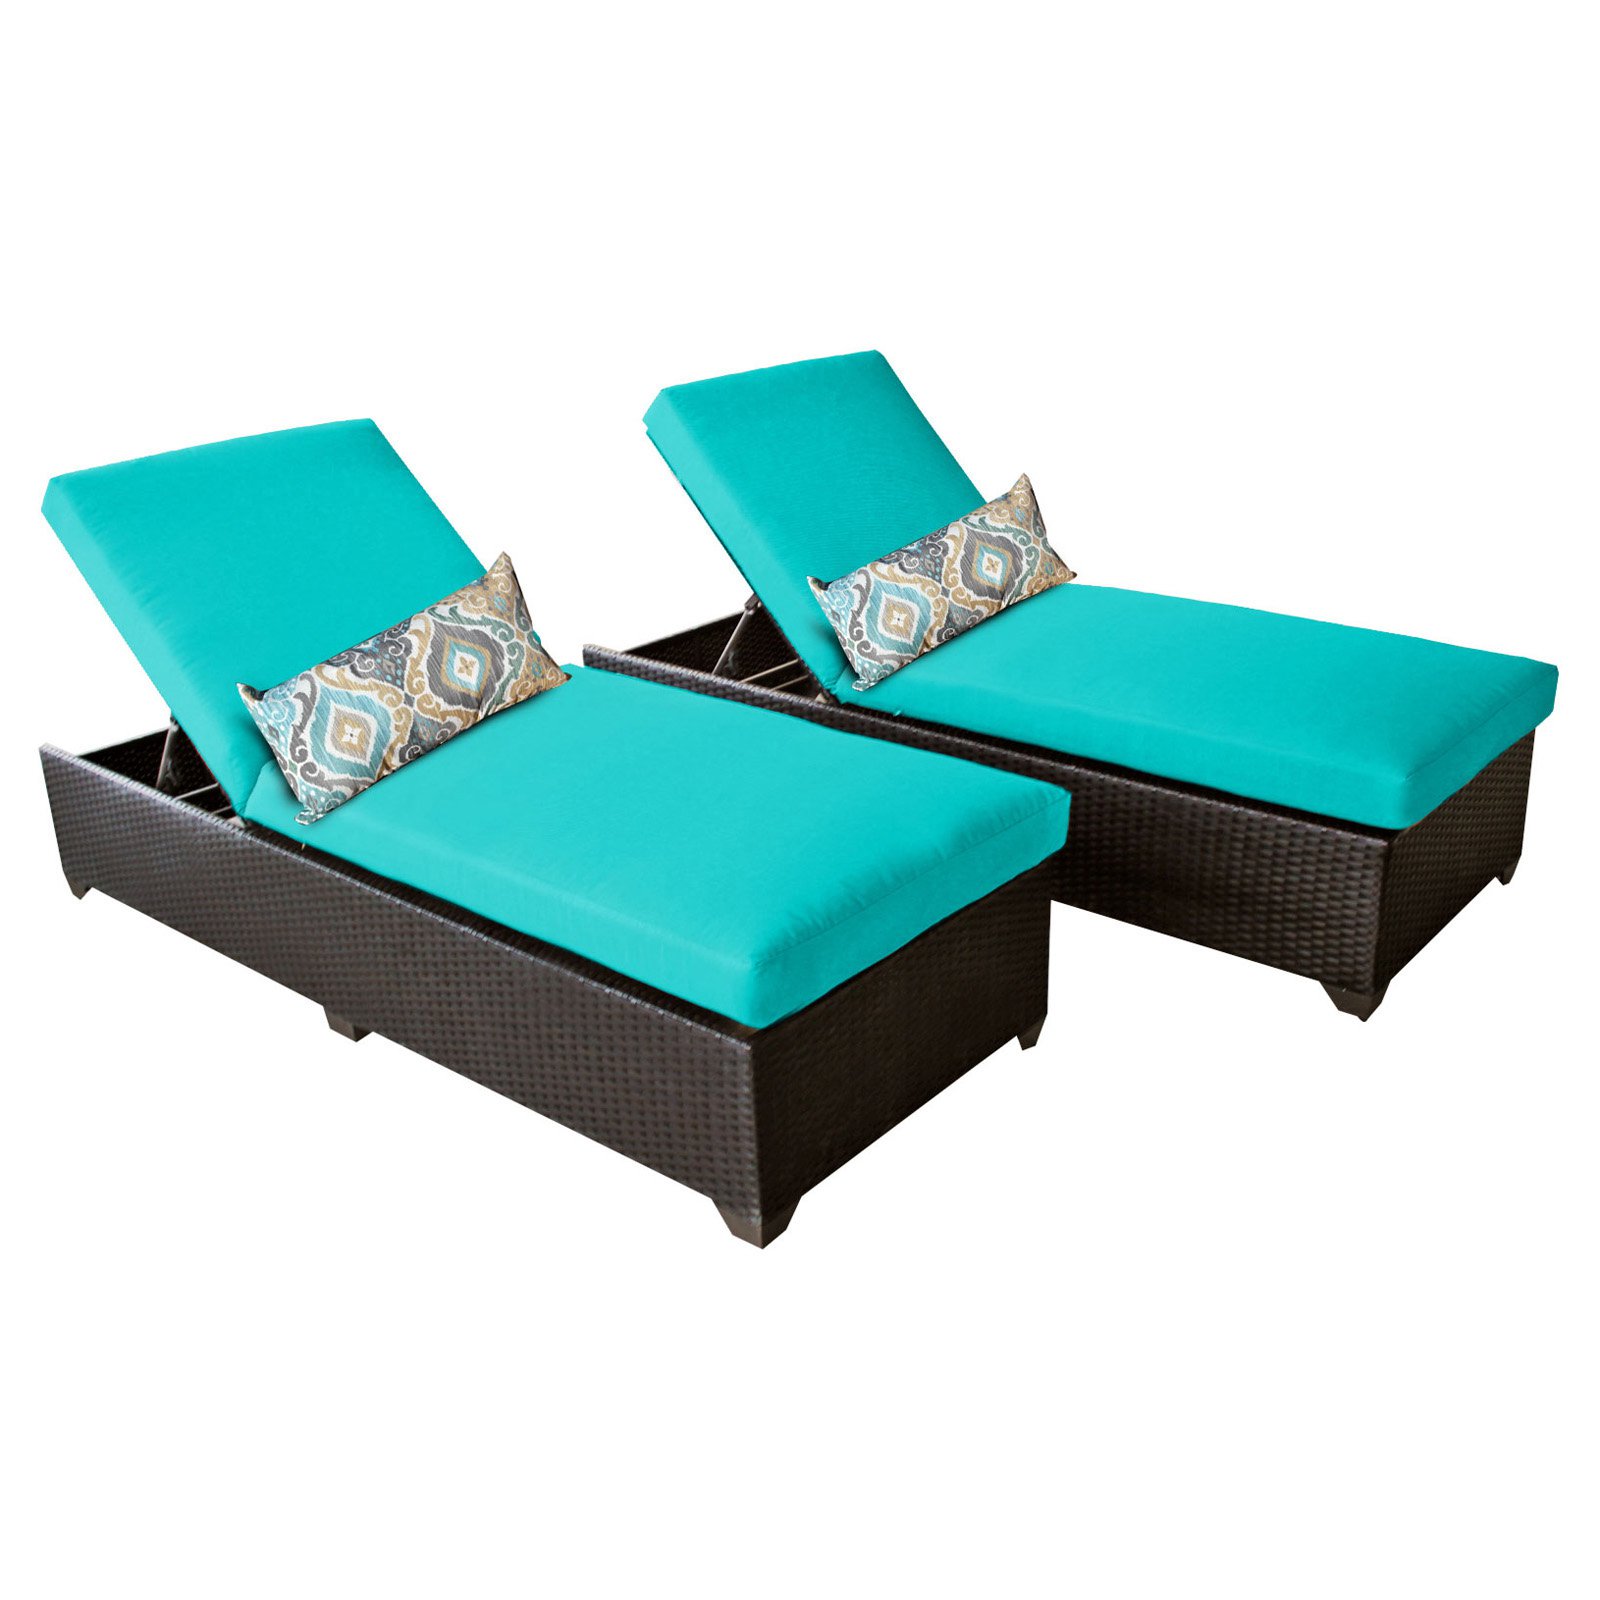 TK Classics Classic Outdoor Chaise Lounge - Set of 2 Chairs and Cushion Covers - image 2 of 2